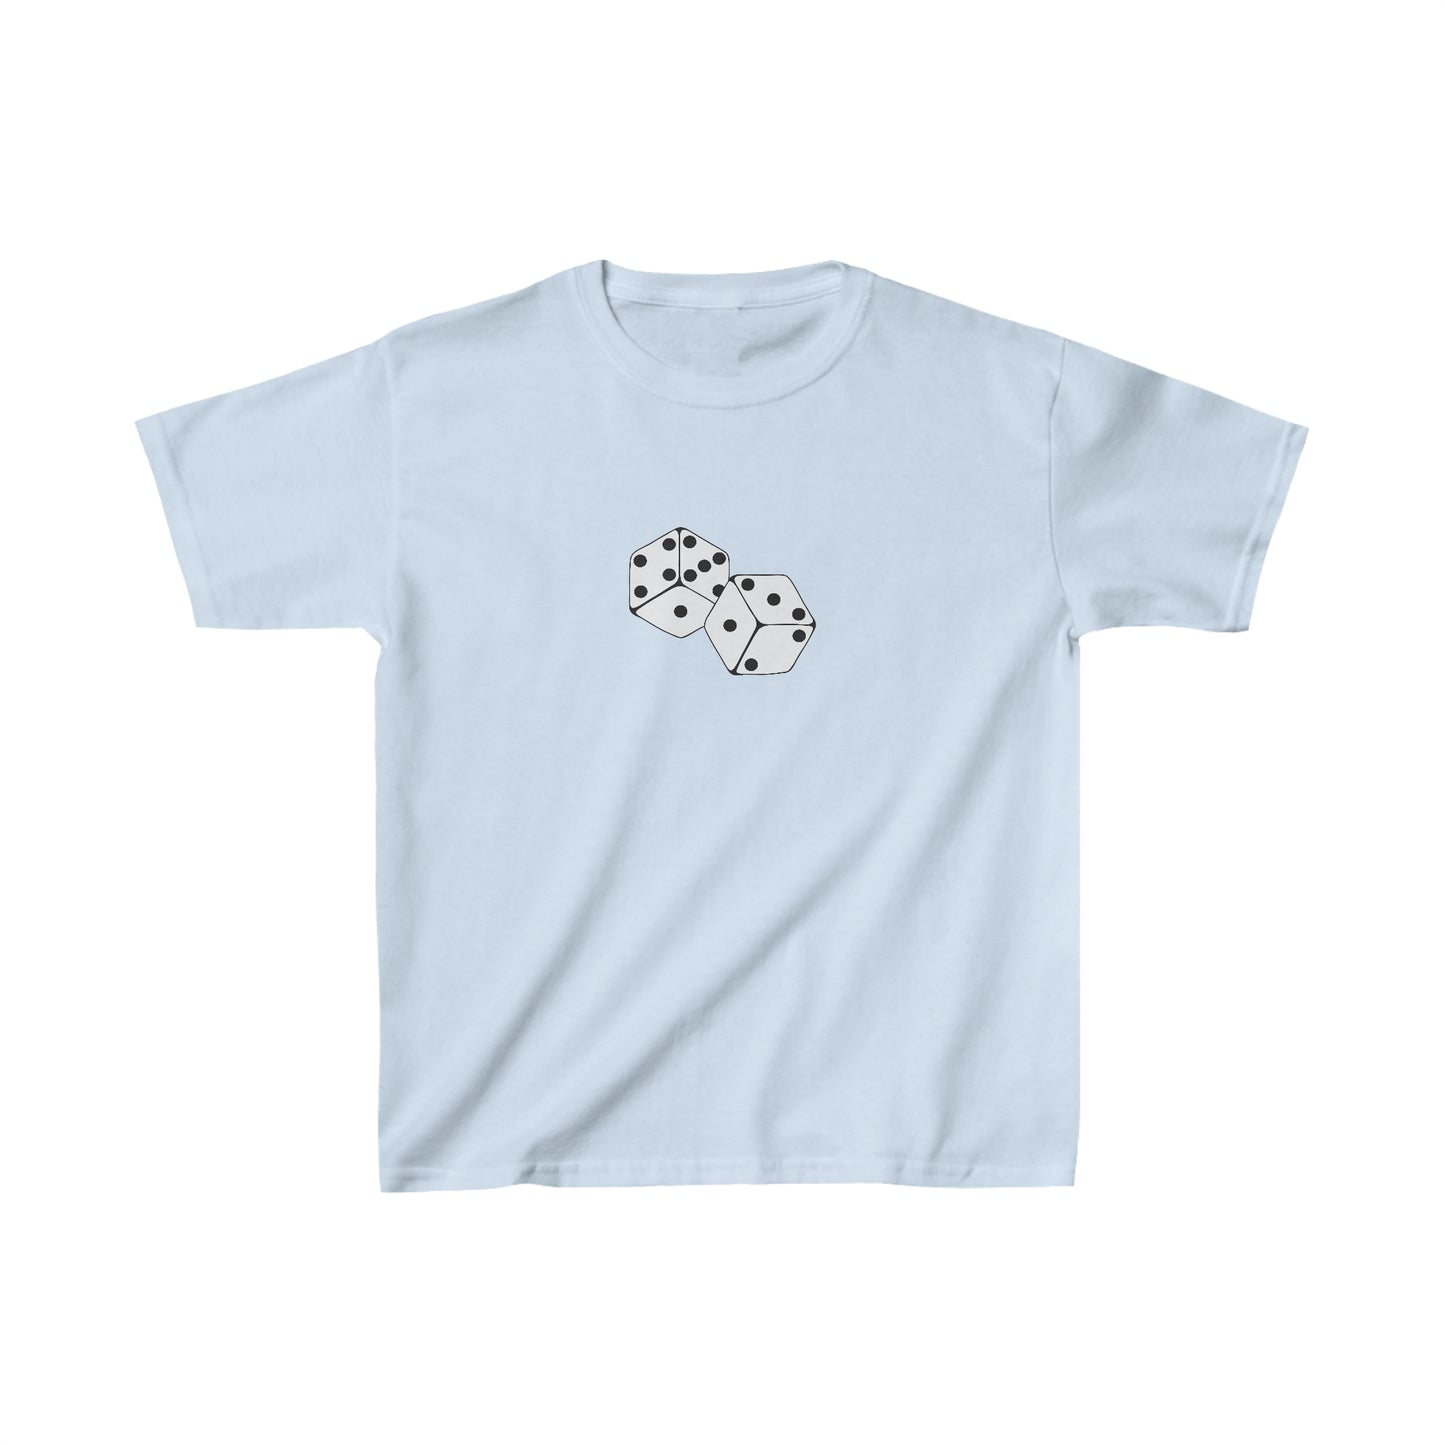 Dice Boxy Fit Baby Tee